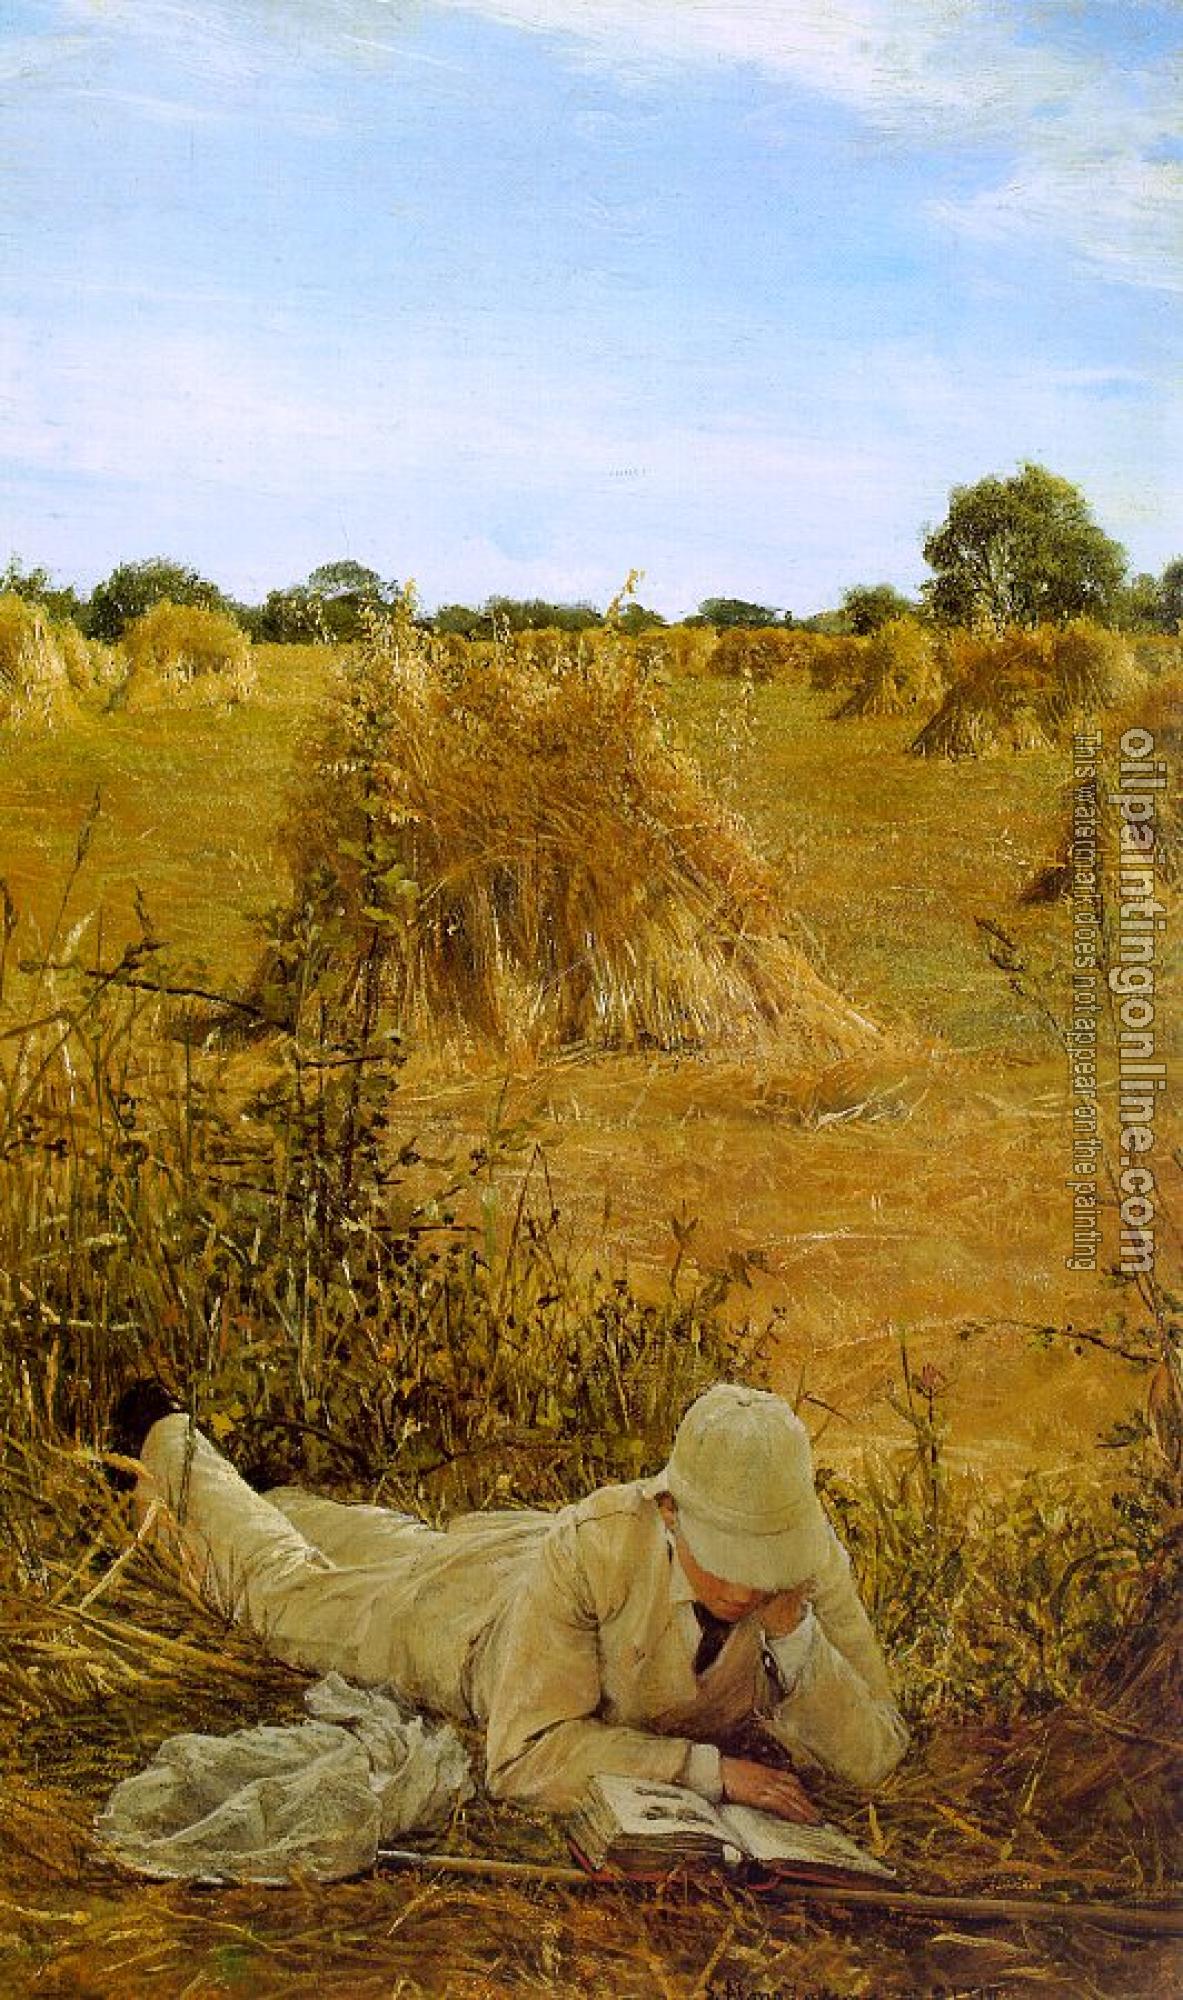 Alma-Tadema, Sir Lawrence - Ninety-Four Degrees in the Shade